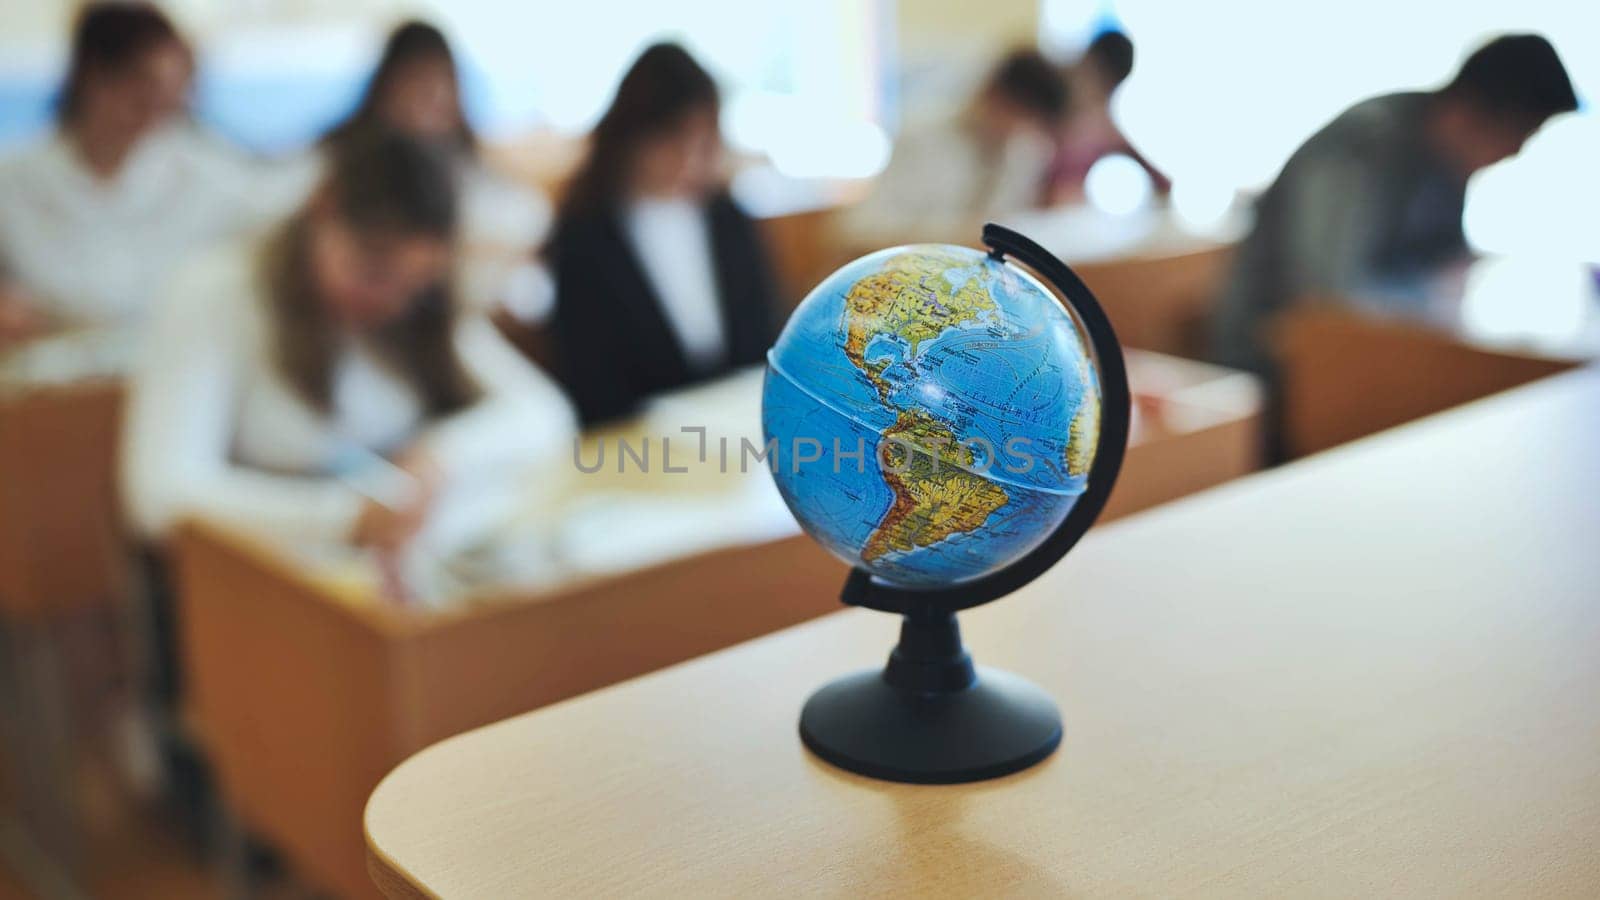 A globe of the world with textbooks in the background of a lesson in a school classroom. The globe shows North and South America